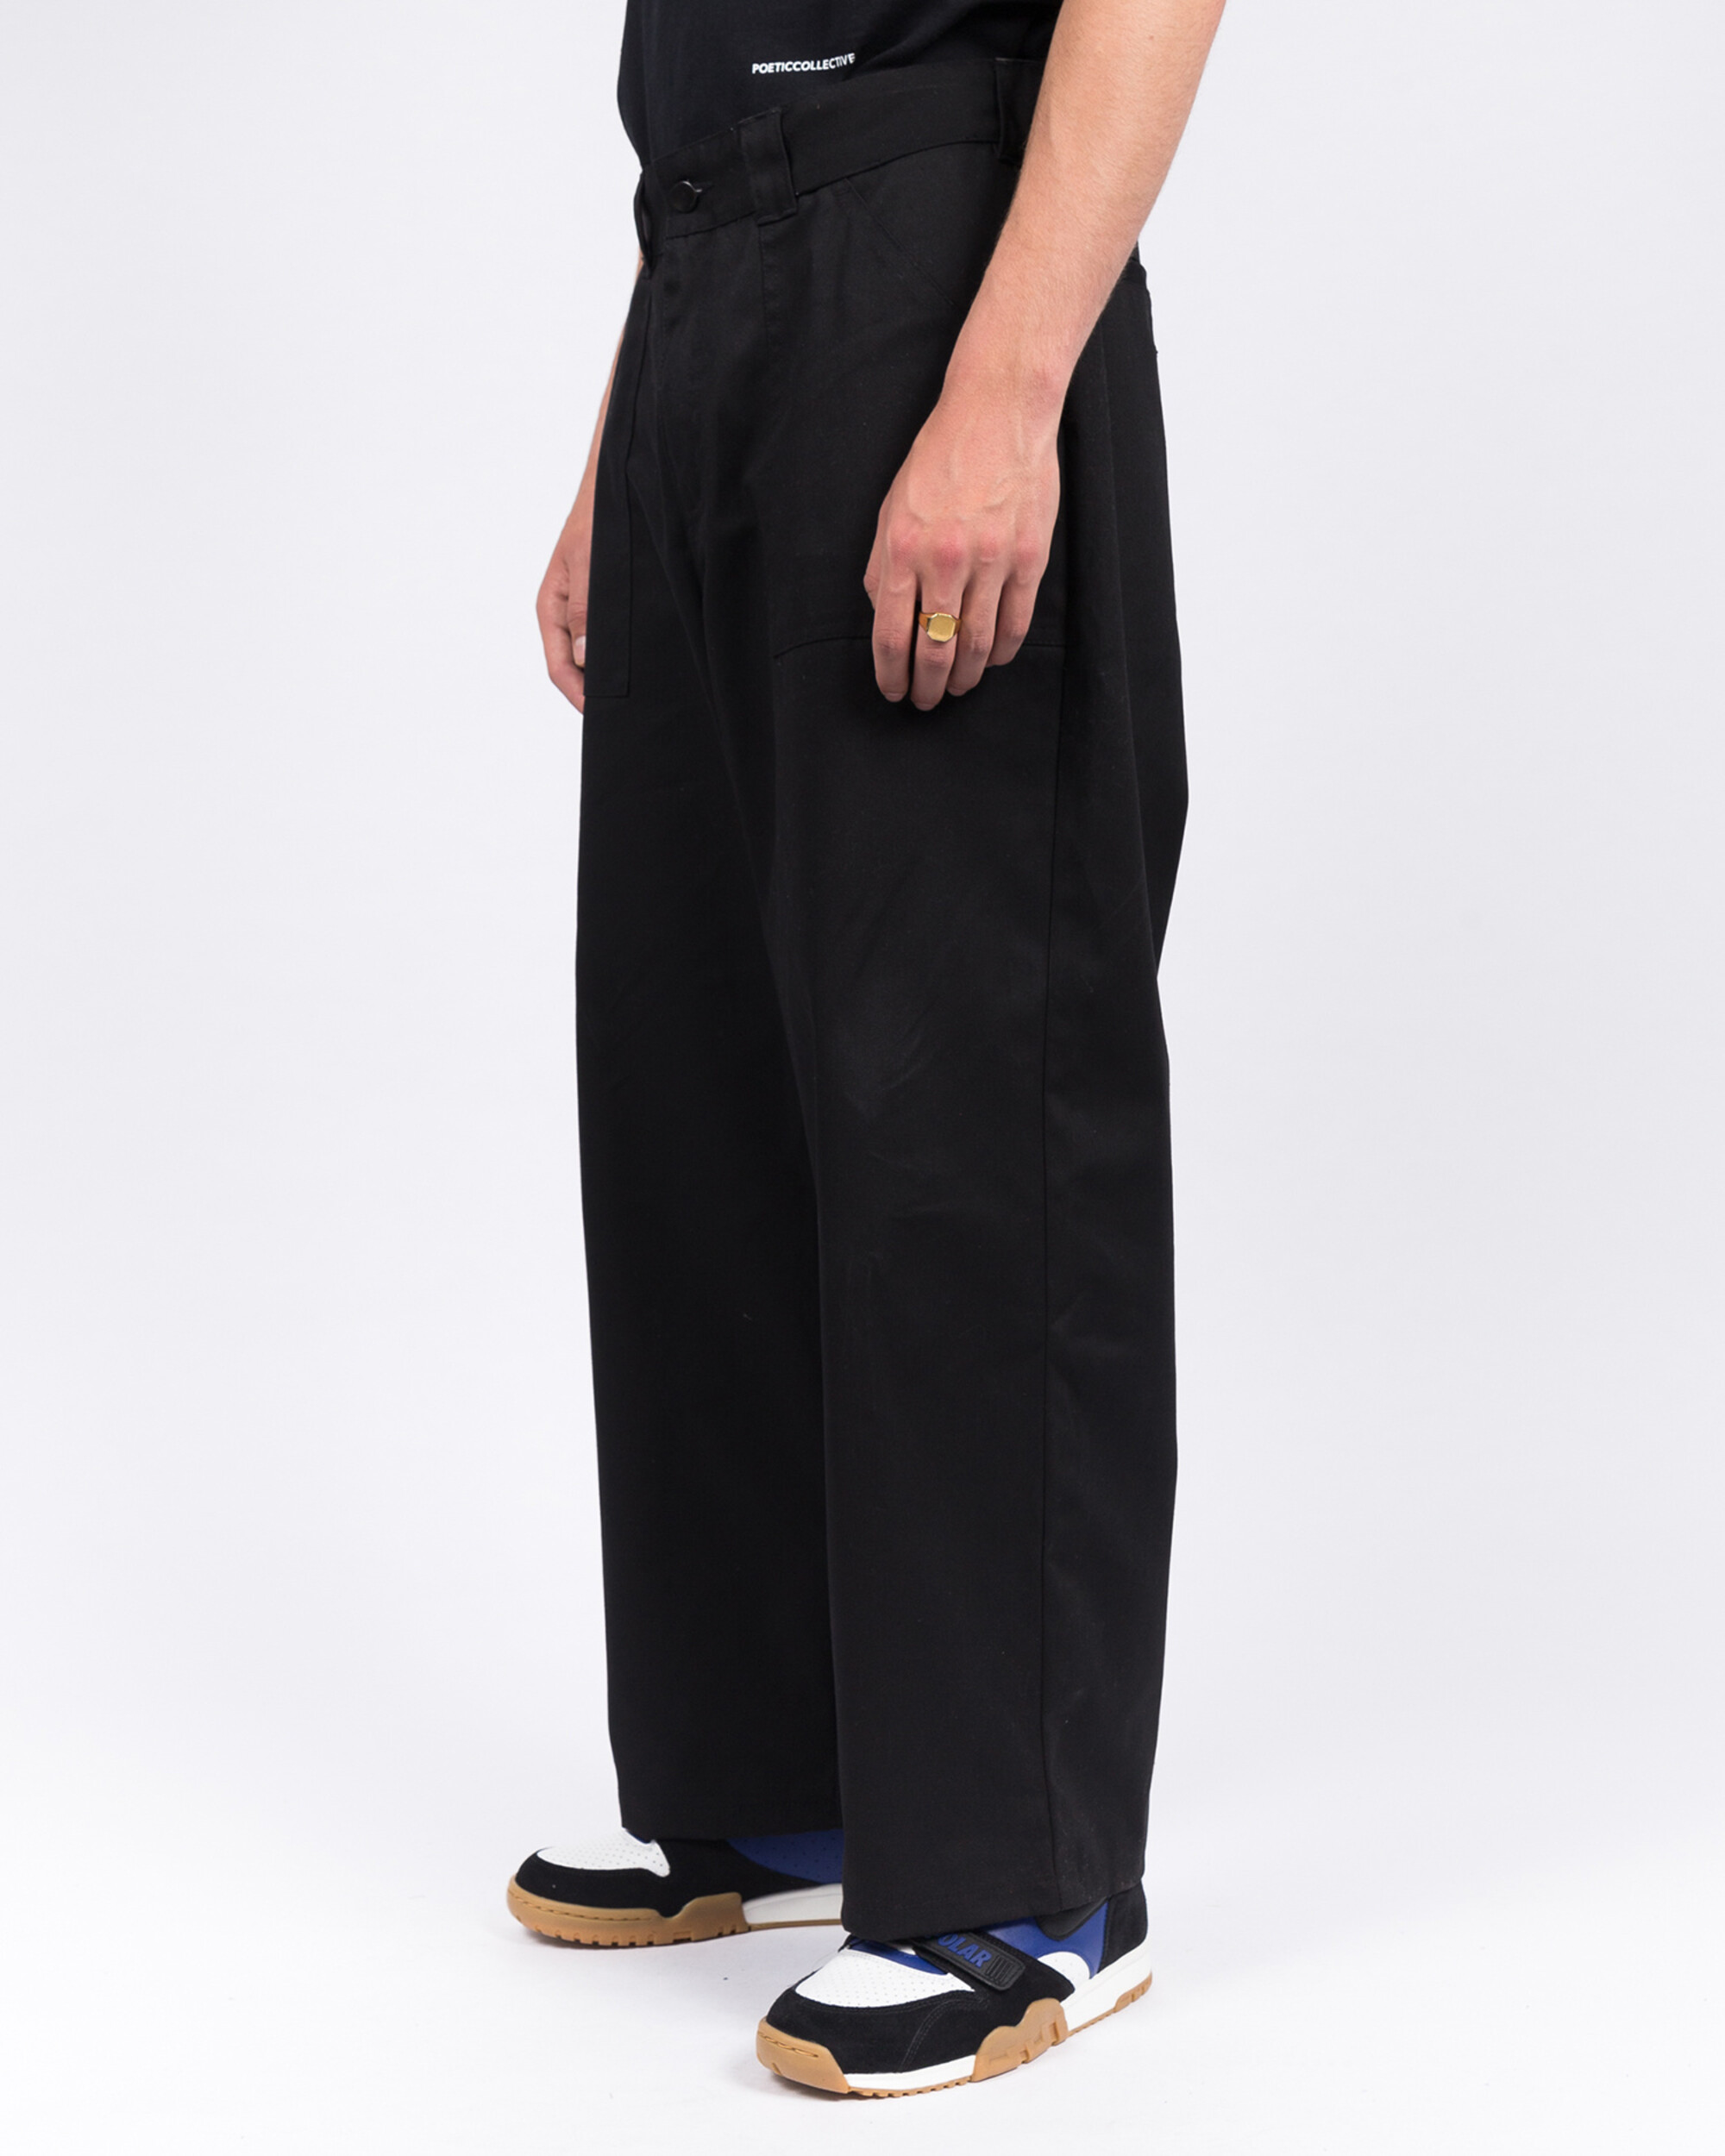 Poetic Collective Skate Pants